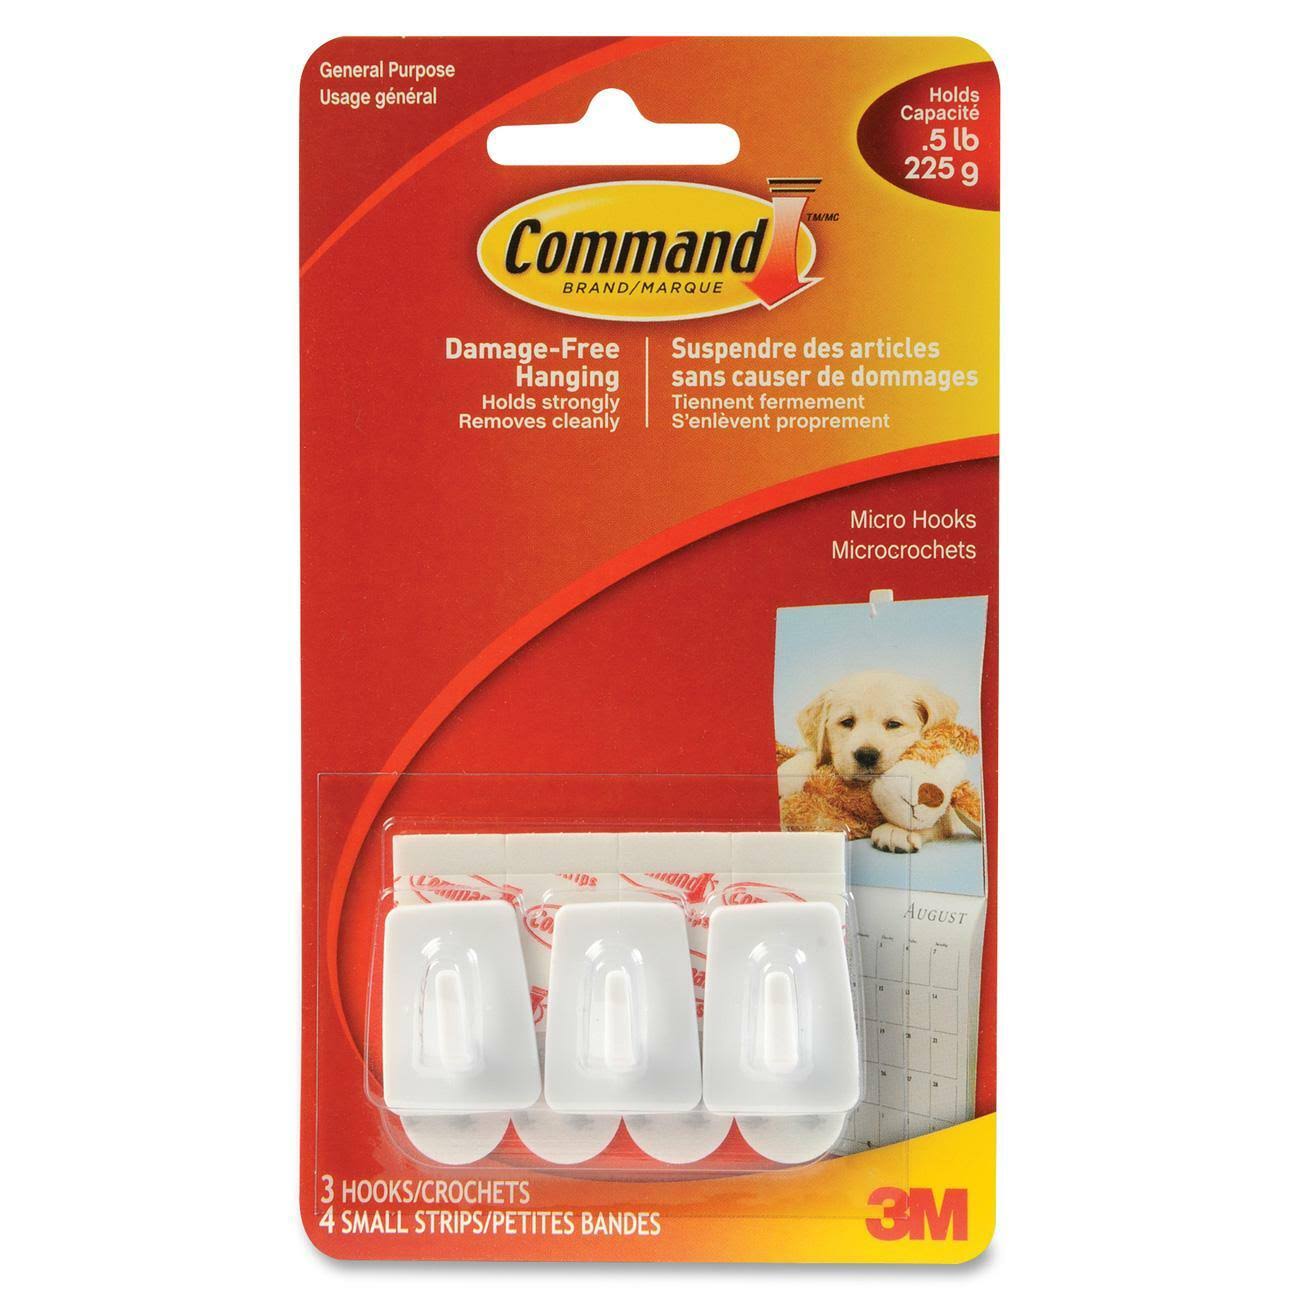 Commande 3 M Micro Crochets Bandes Dommages Free Hanging photo 1 x 3 hold up to 225 g 